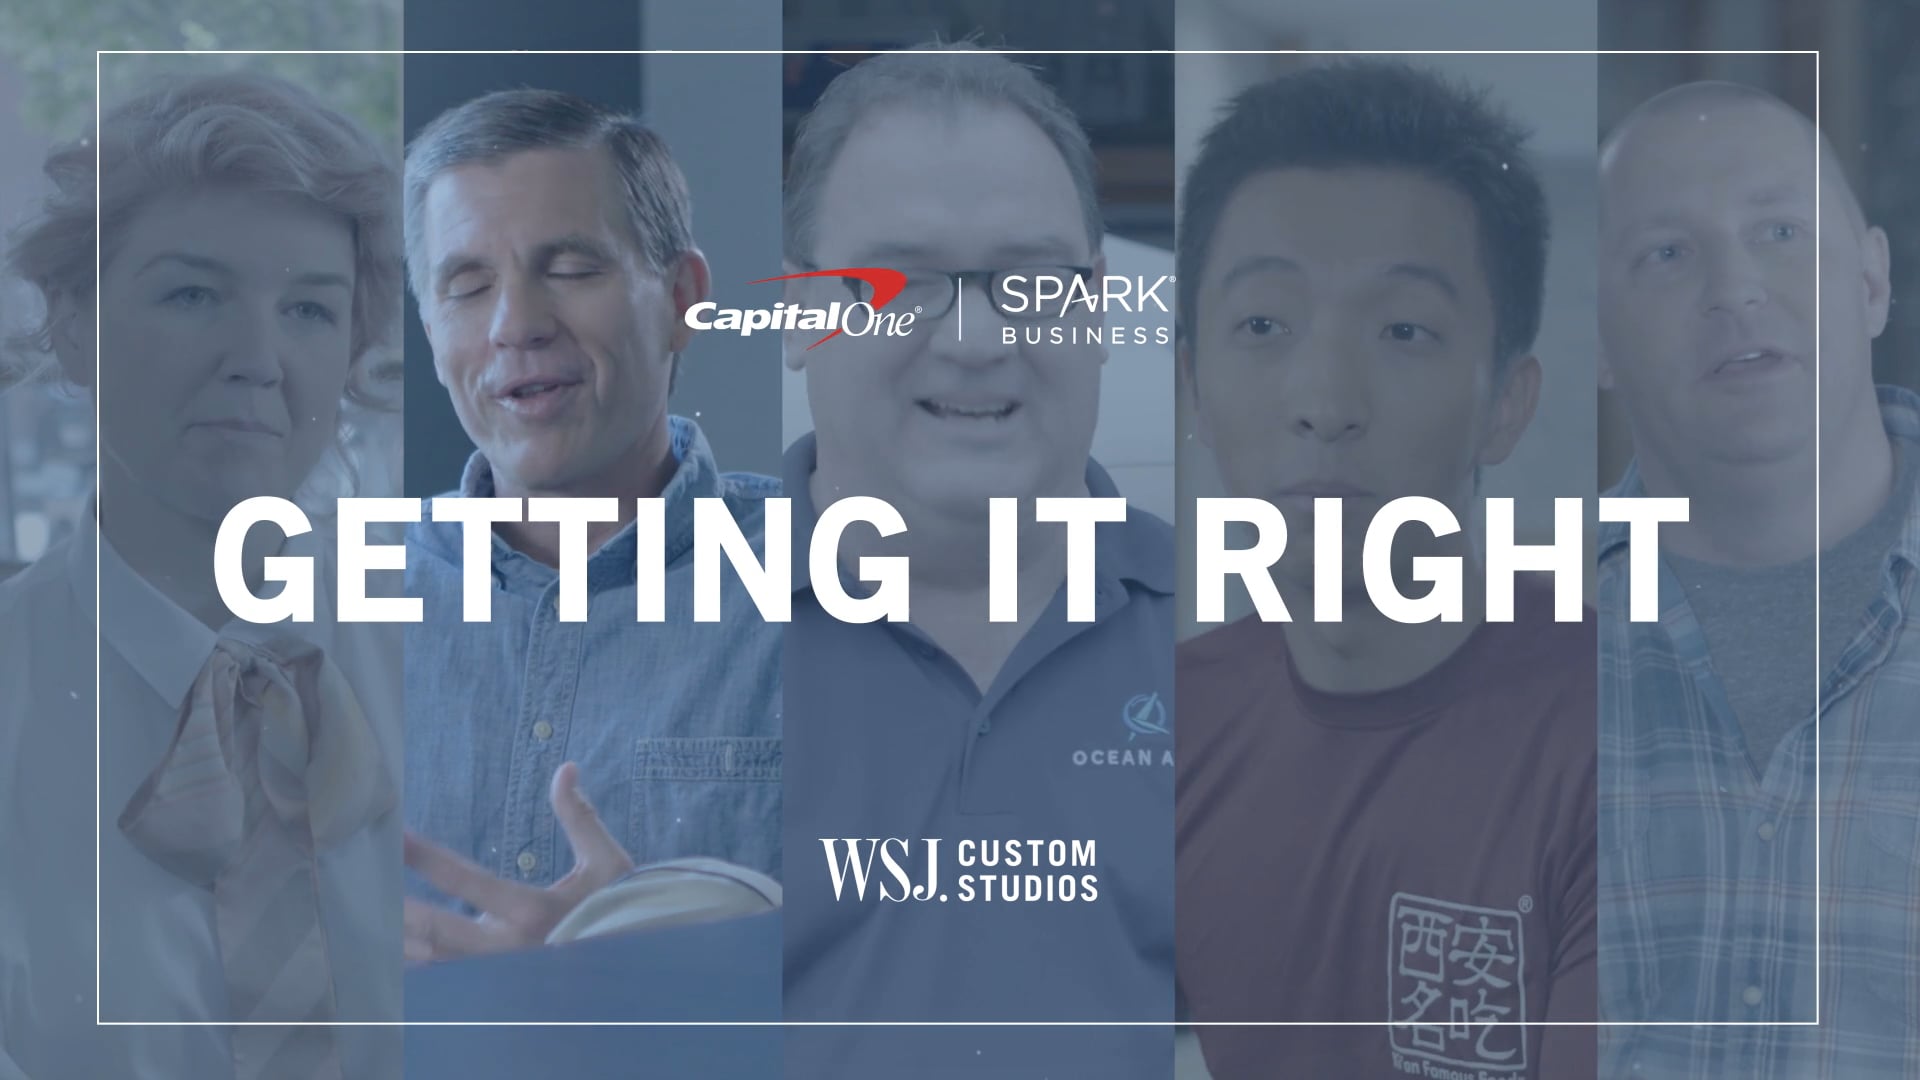 Capital One - Getting It Right